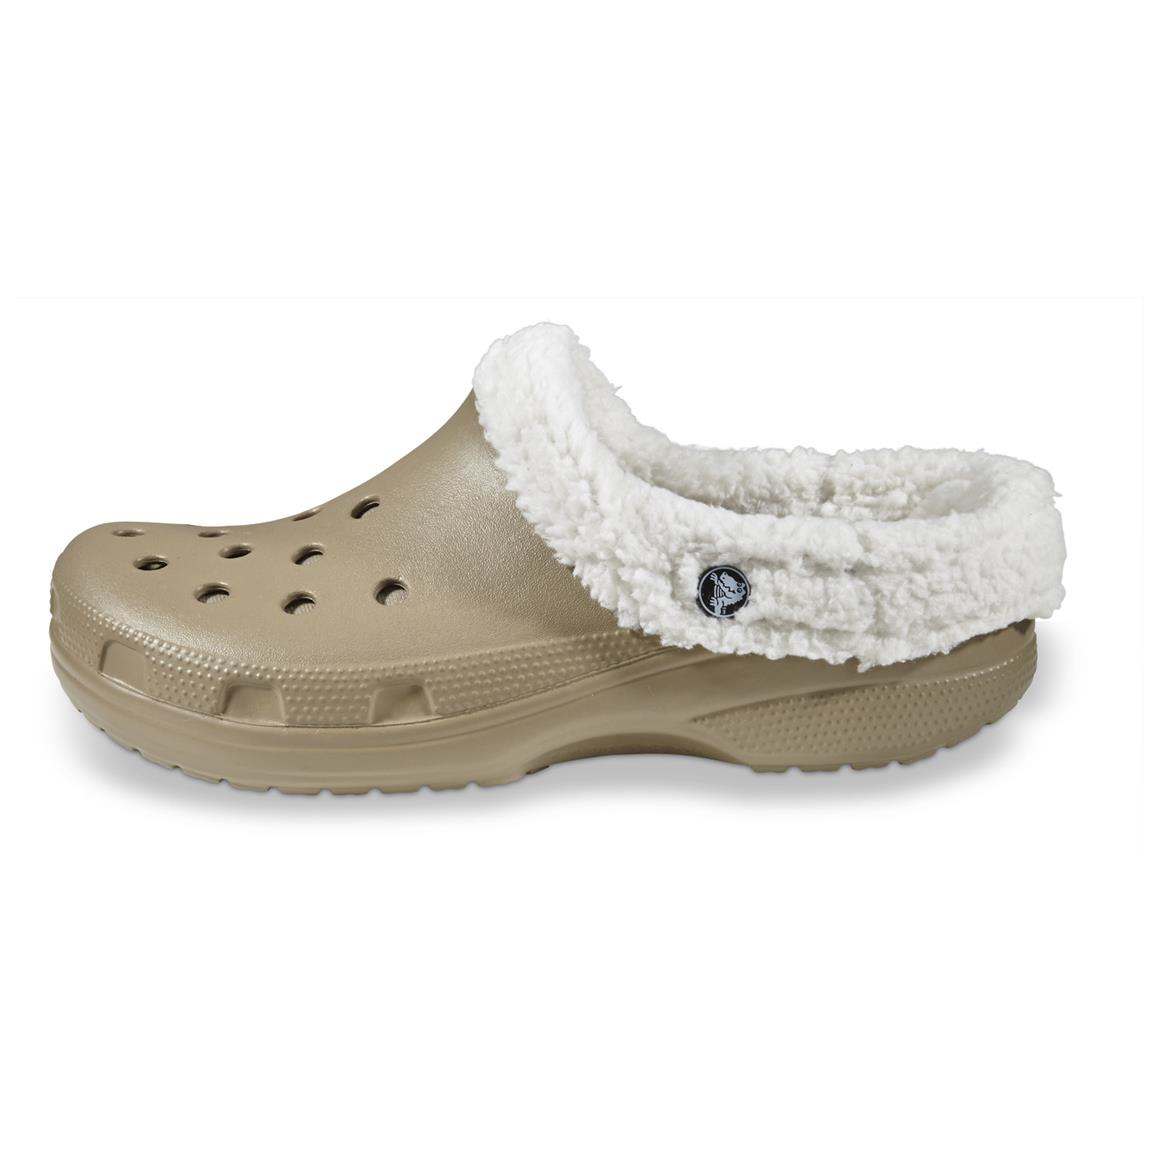 Crocs Unisex Mammoth Lined Clogs - 665562, Casual Shoes at Sportsman's